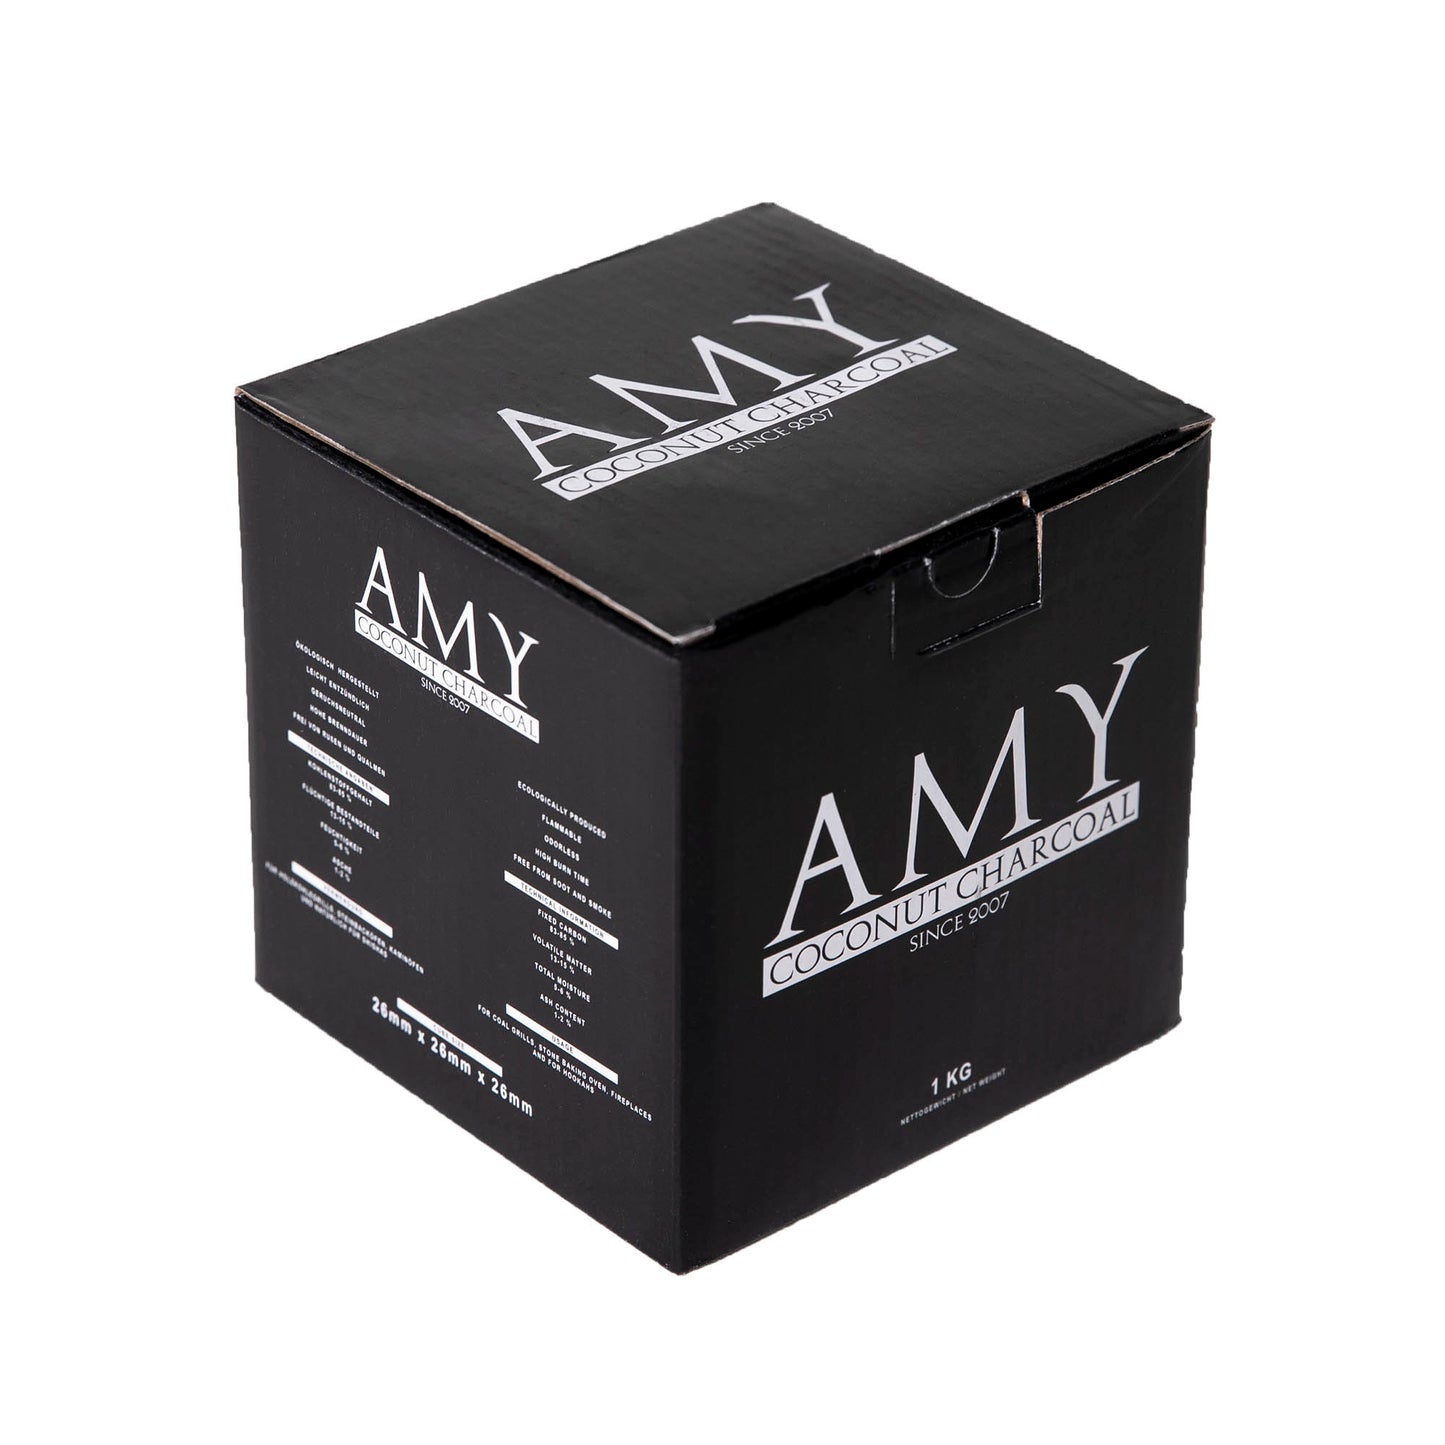 Amy Deluxe 1 Kg 26mm